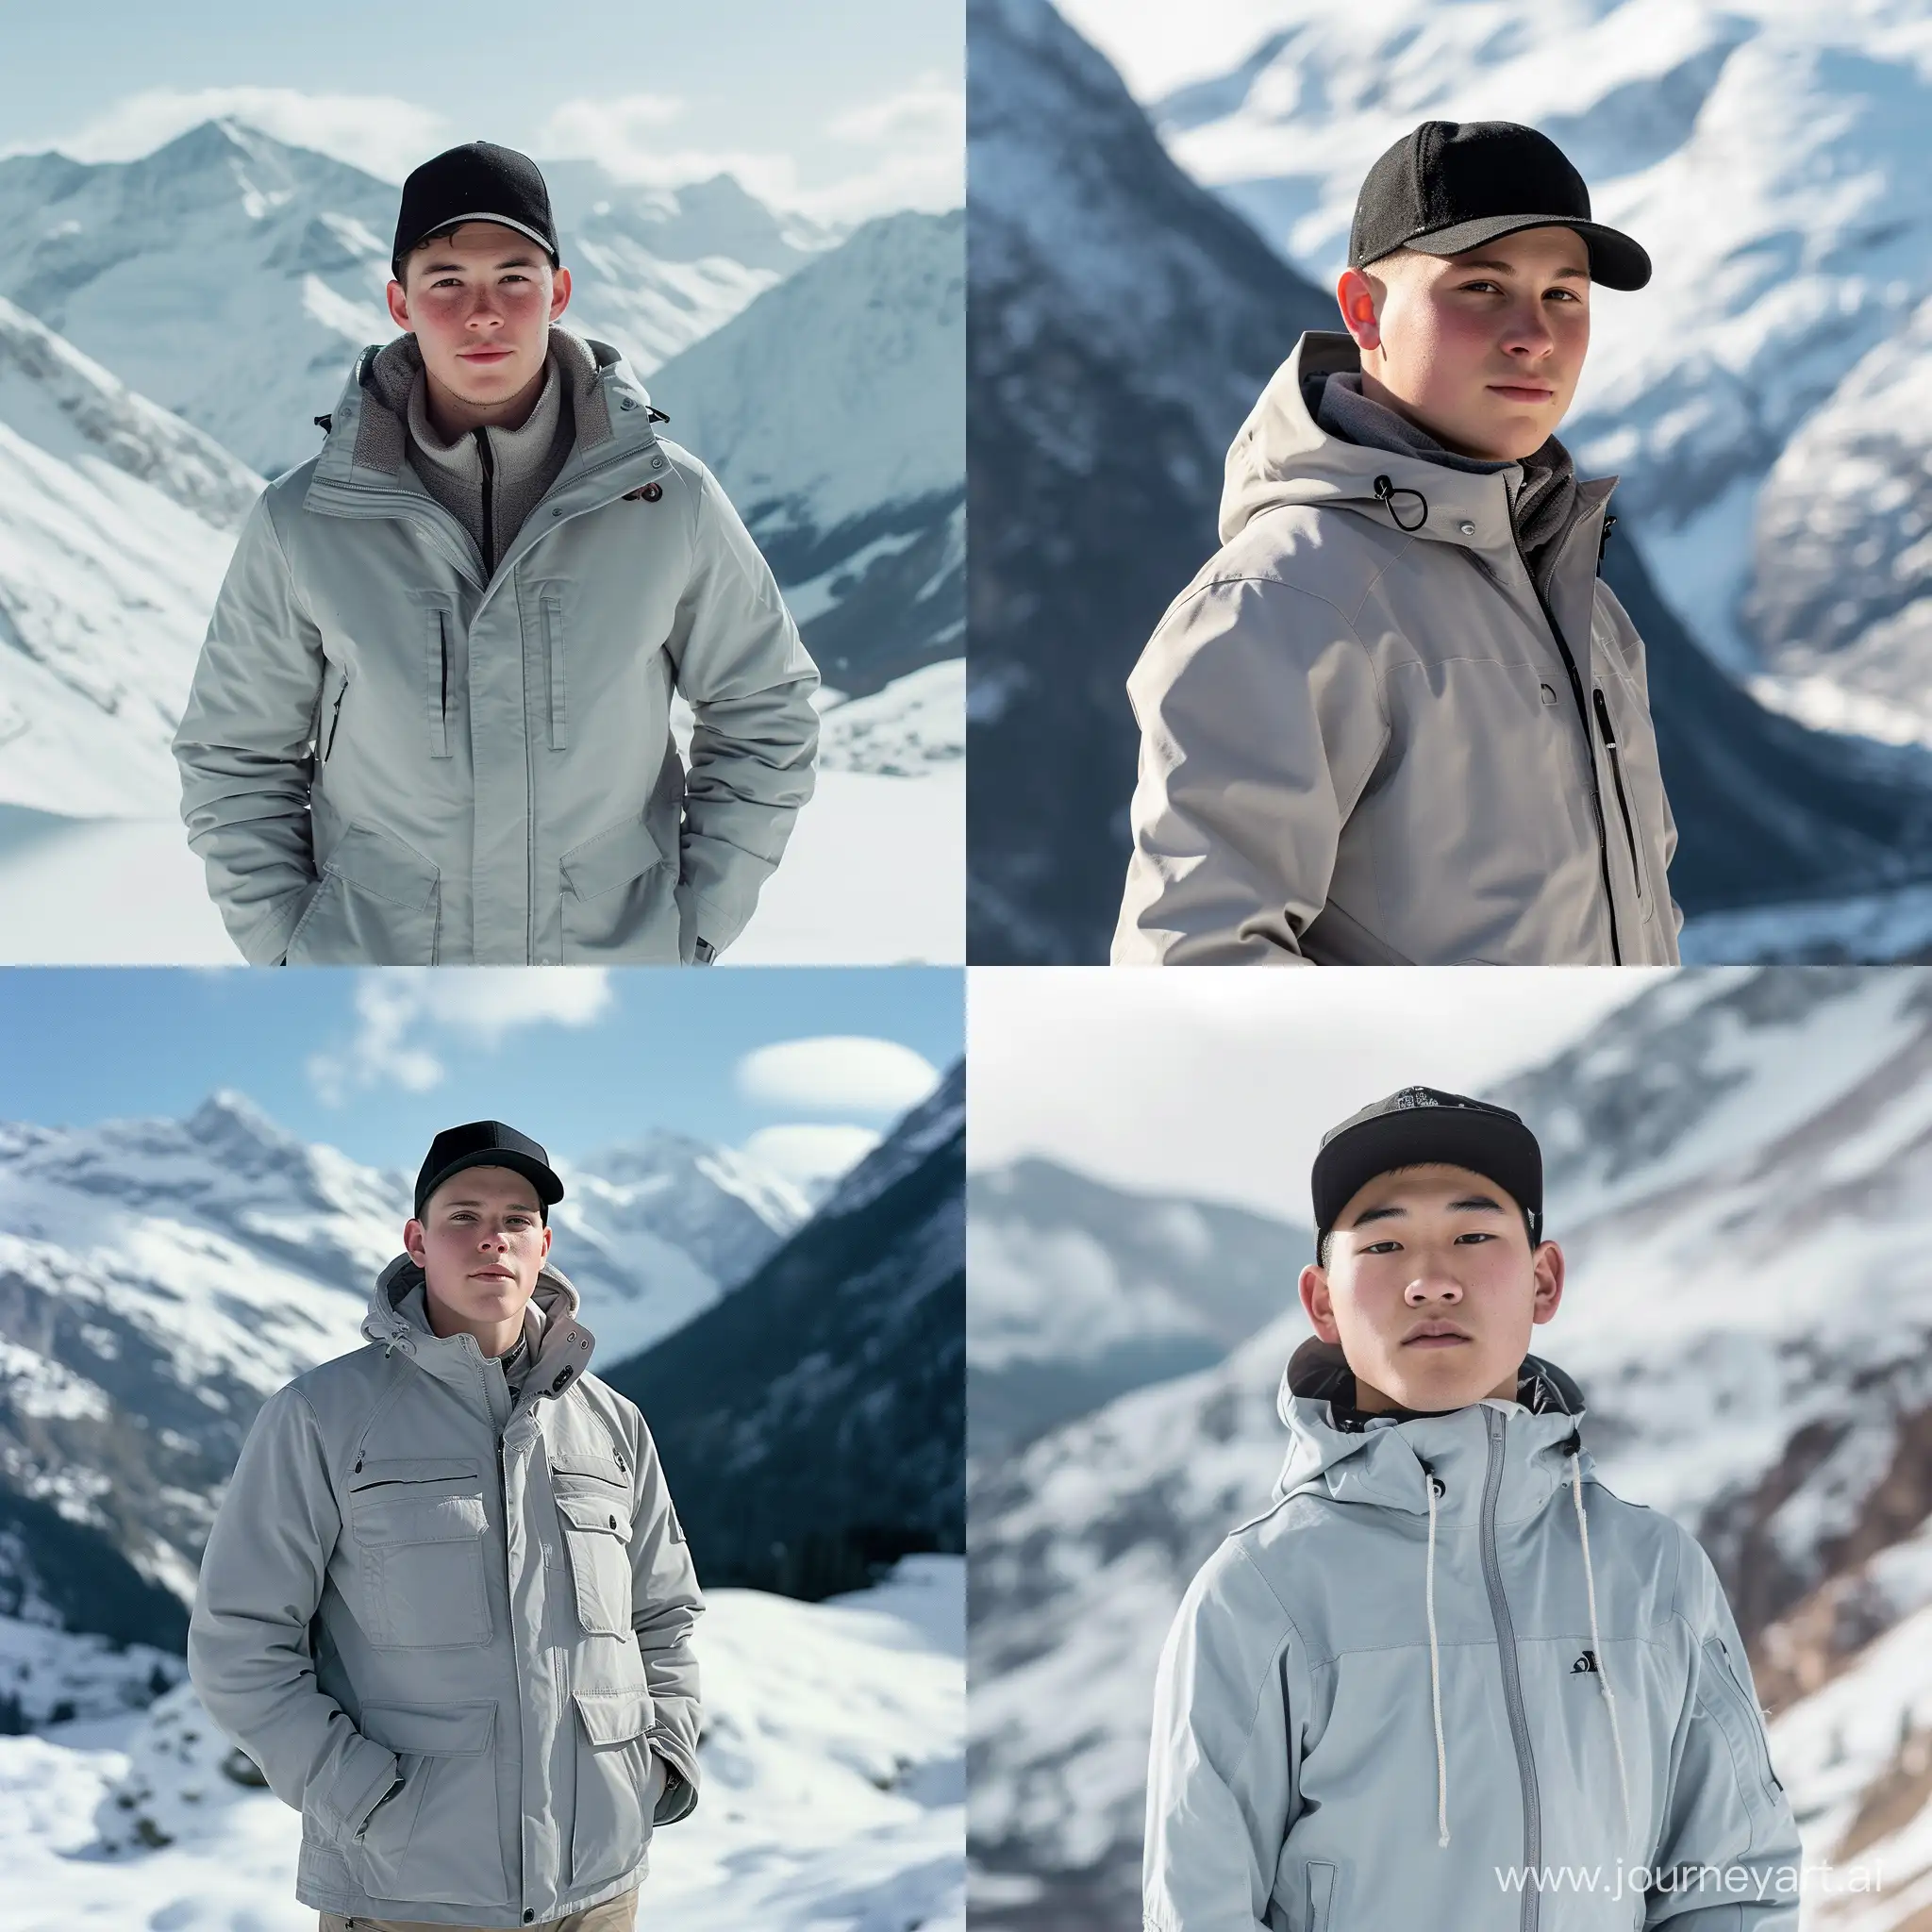 Adventurous-Young-Man-in-Snowy-Mountains-with-Stylish-Winter-Attire